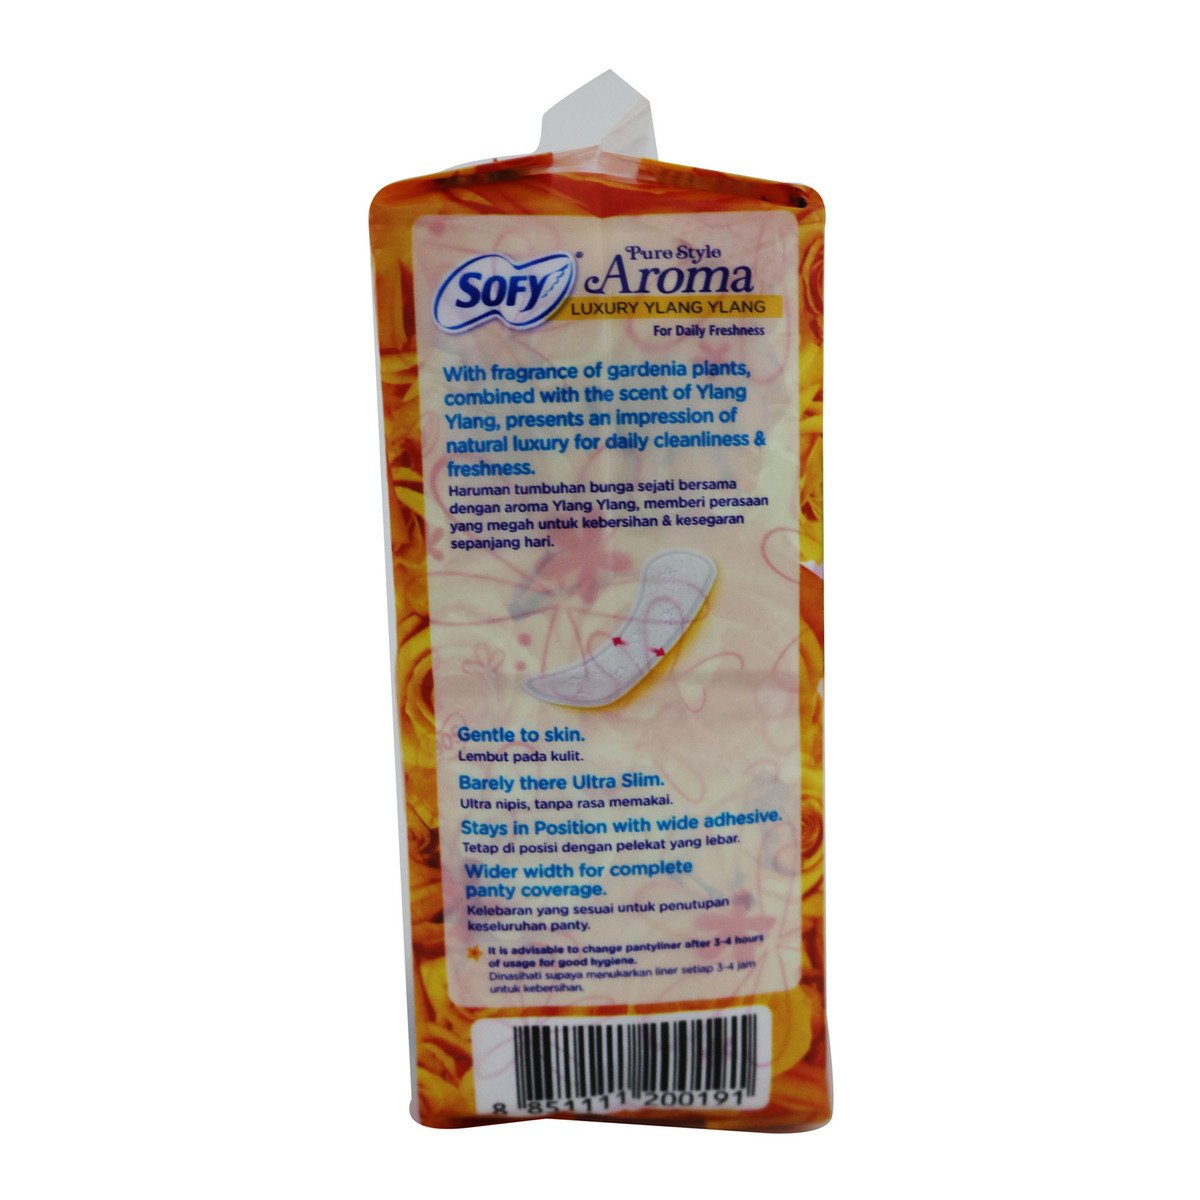 Sofy Panty Liner Pure Style Aroma Luxury 40 Counts